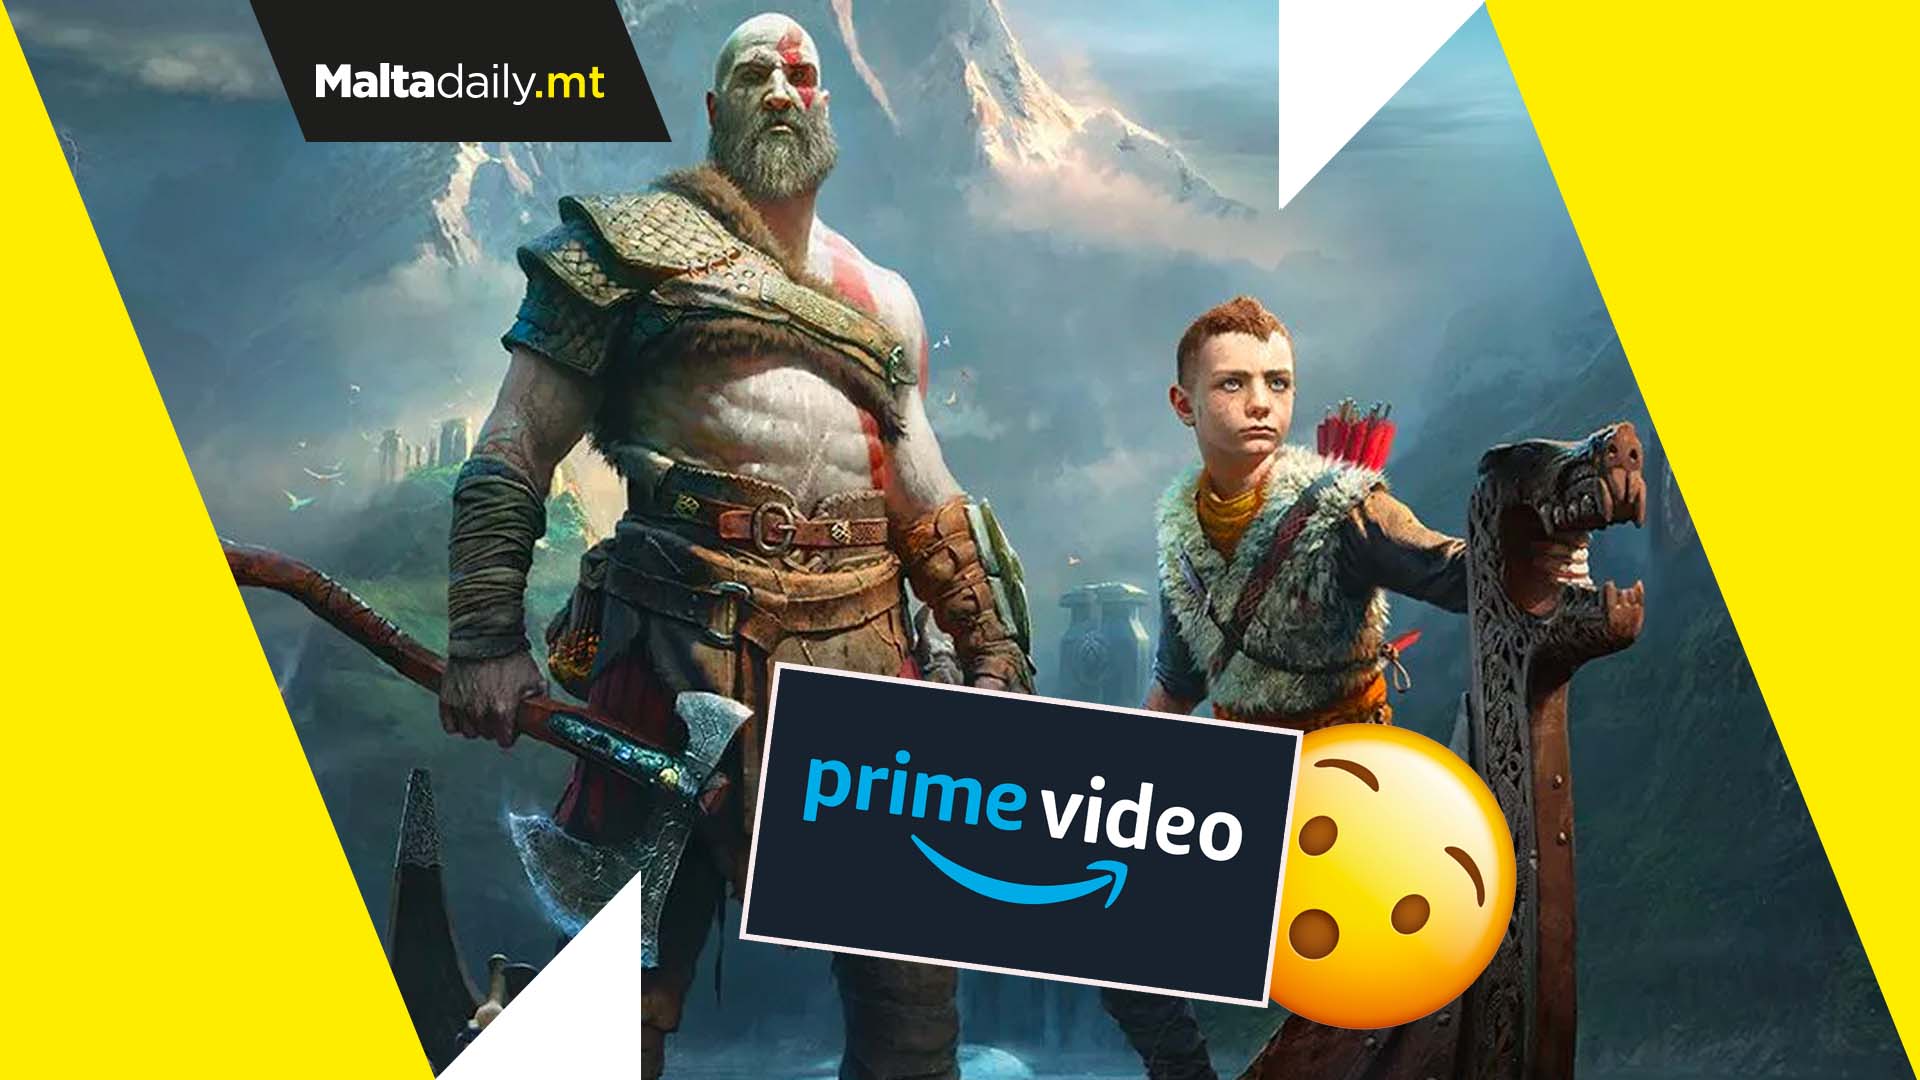 God of War could be made into a TV series by Amazon Prime